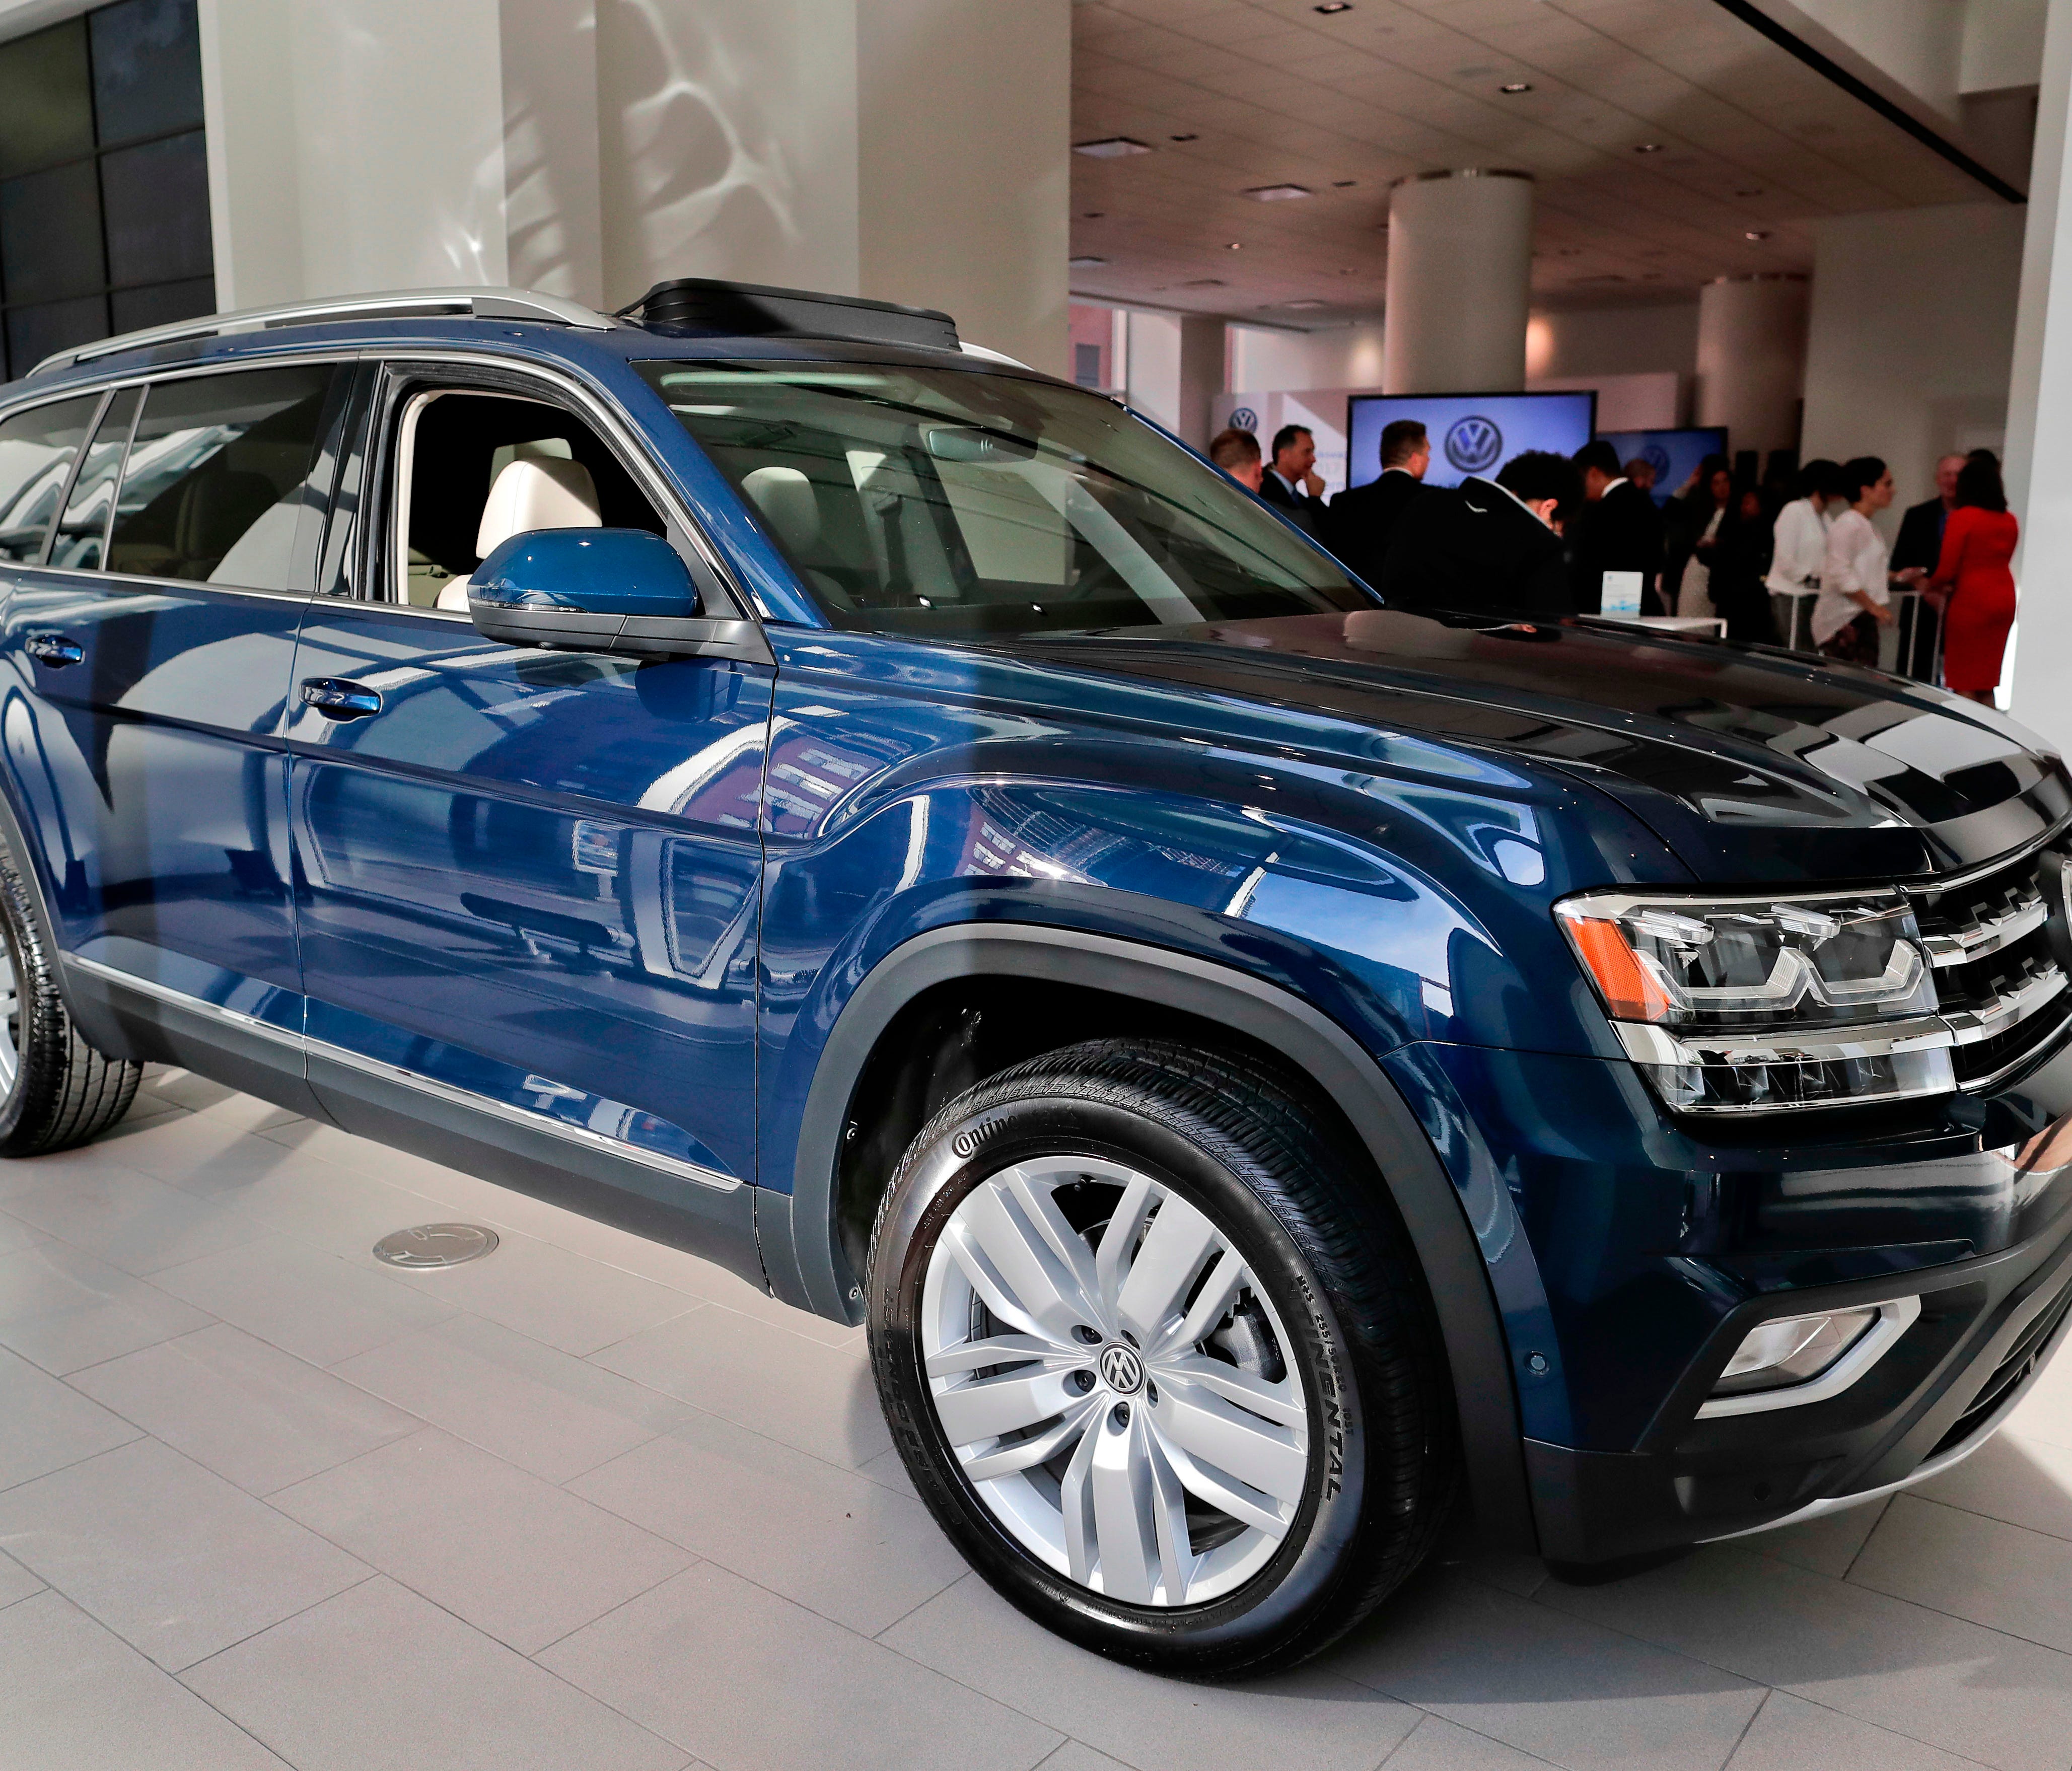 The 2018 Volkswagen Atlas sits on the showroom floor at the company's New York flagship store during a media preview for the New York International Auto Show in New York. Starting with the 2018 model year, Volkswagen offers a six-year or 72,000-mile 